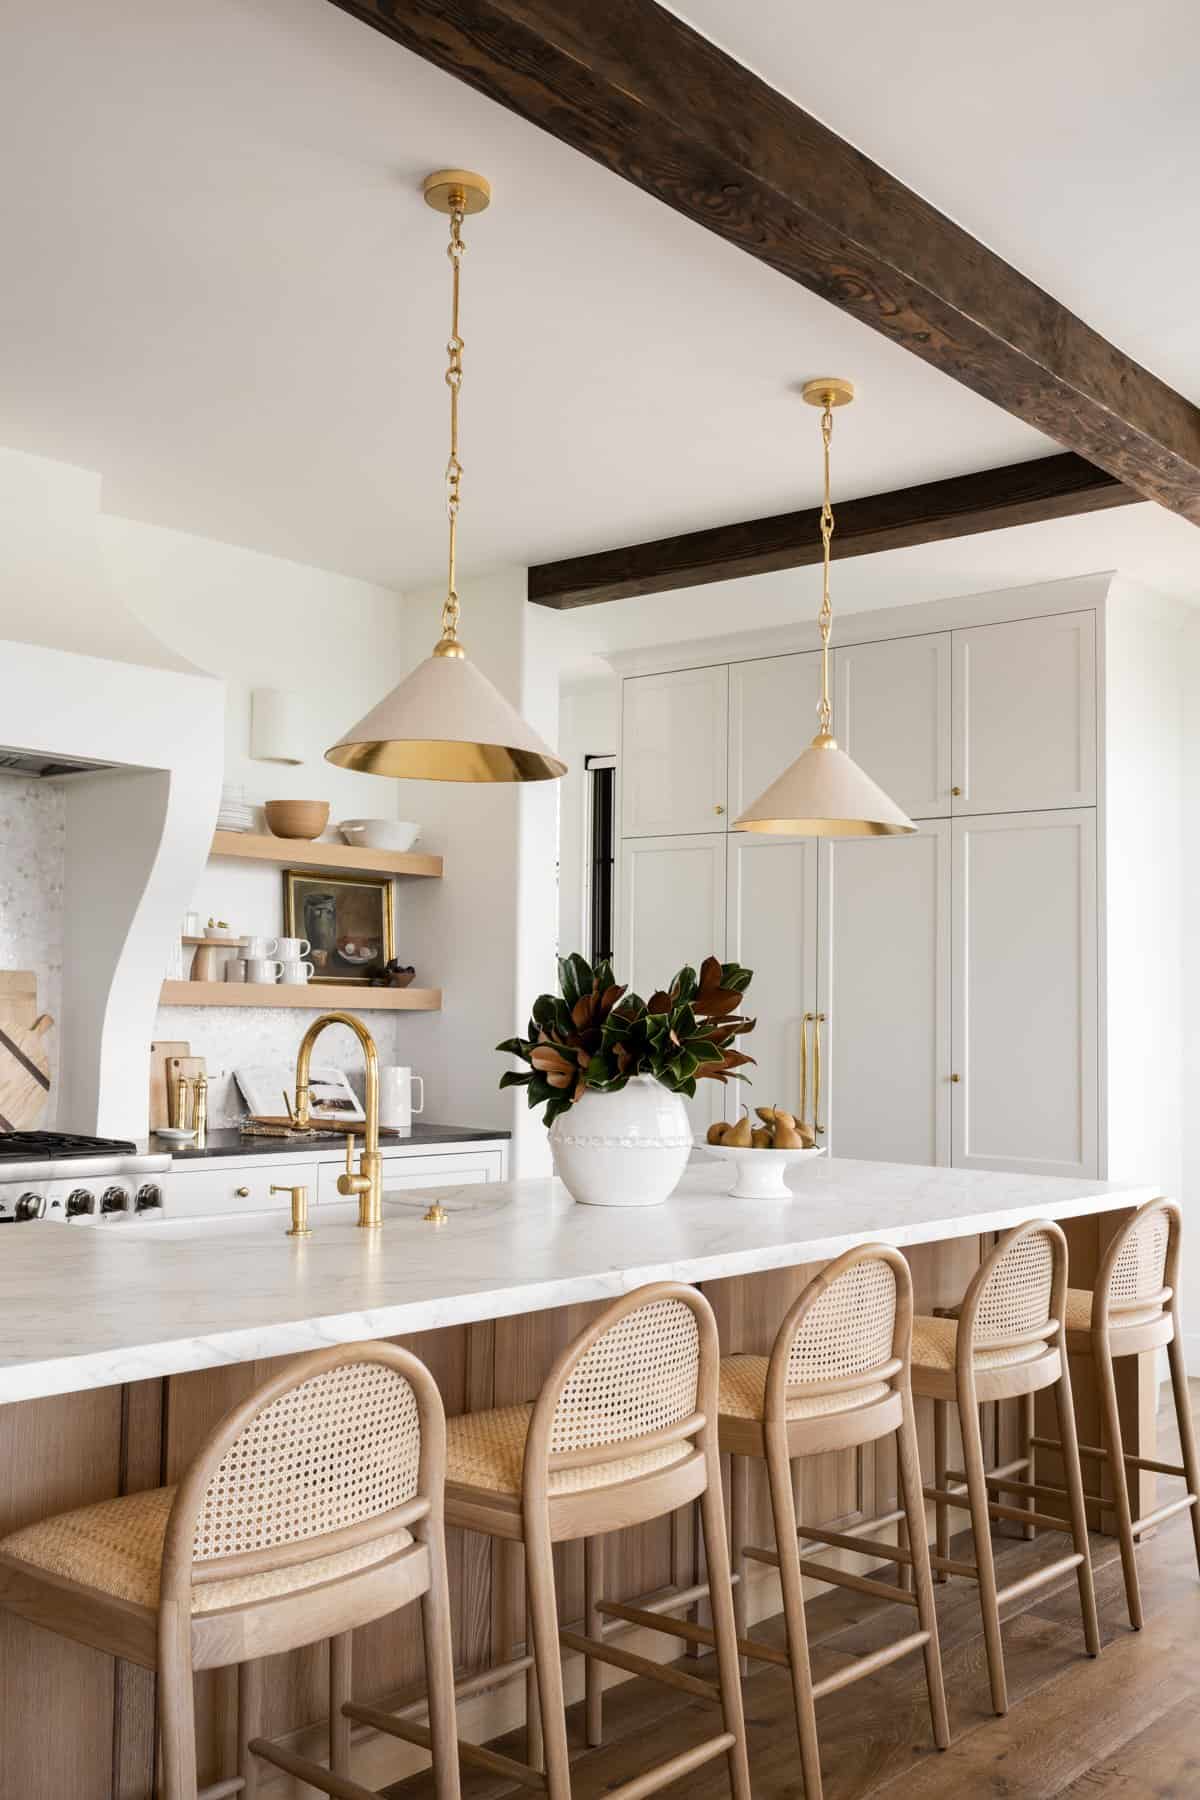 20 Inspiring Kitchen Remodel Ideas to Steal